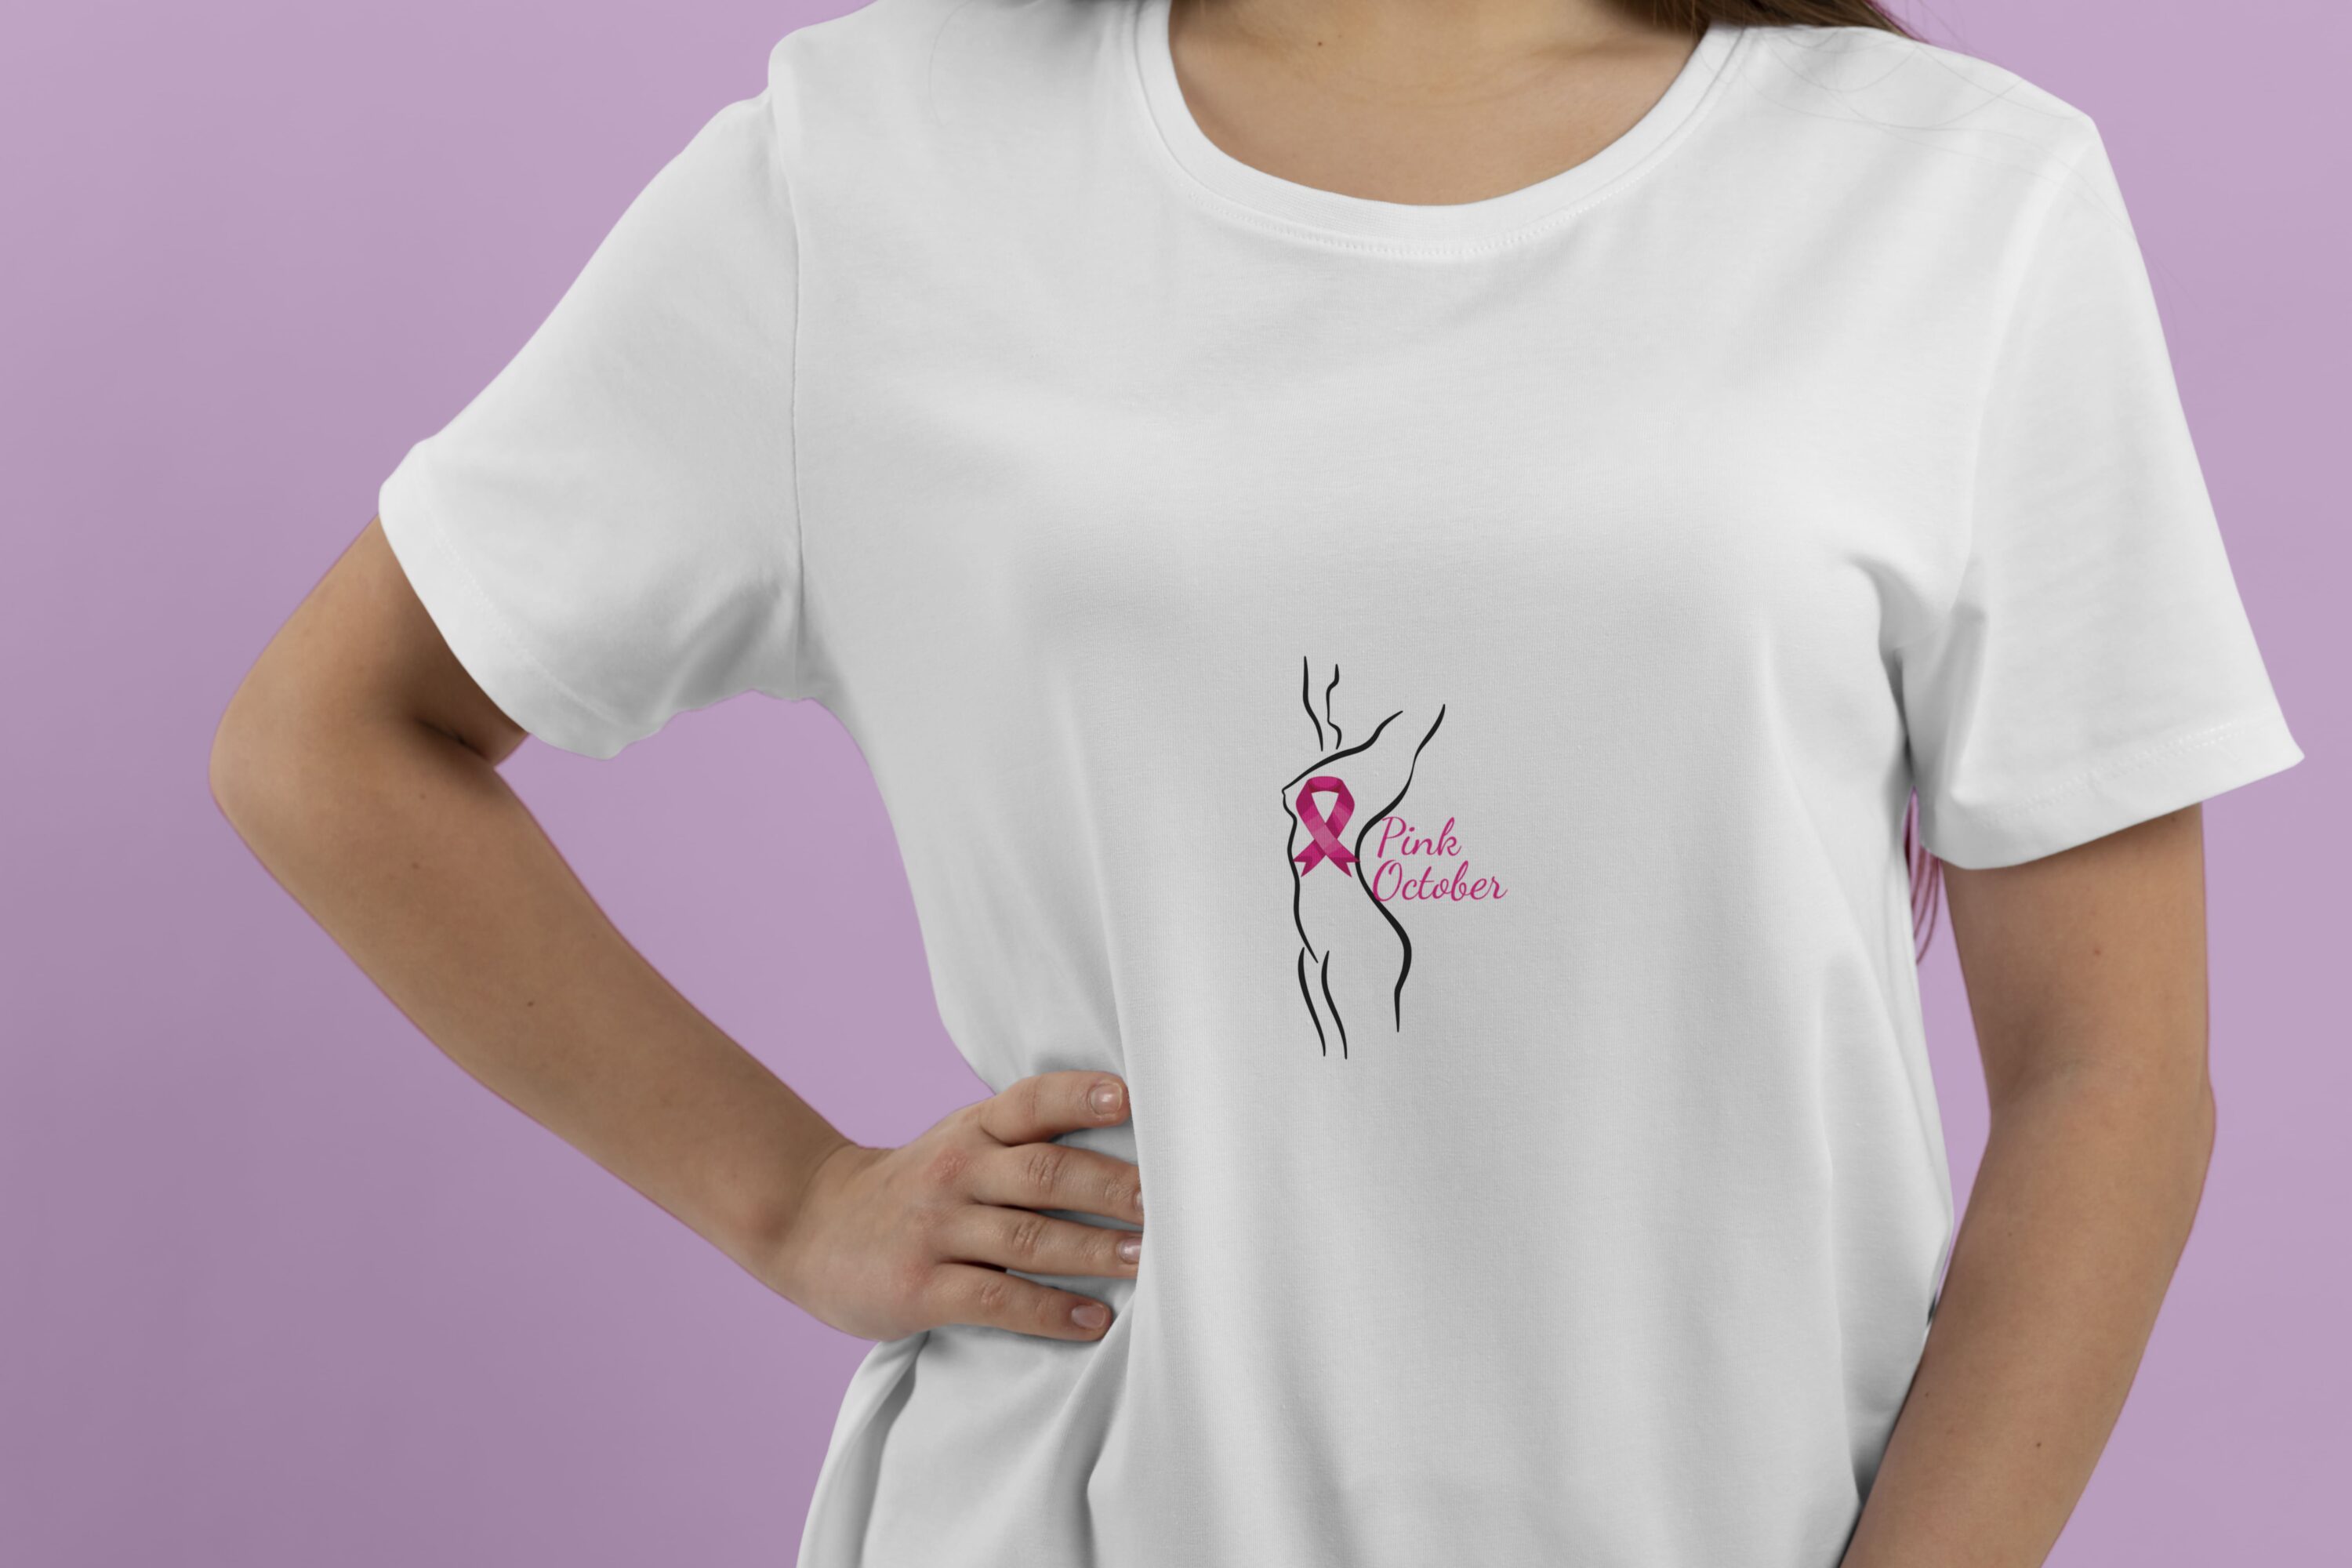 Outline women body with a some lettering and pink breast cancer ribbon.